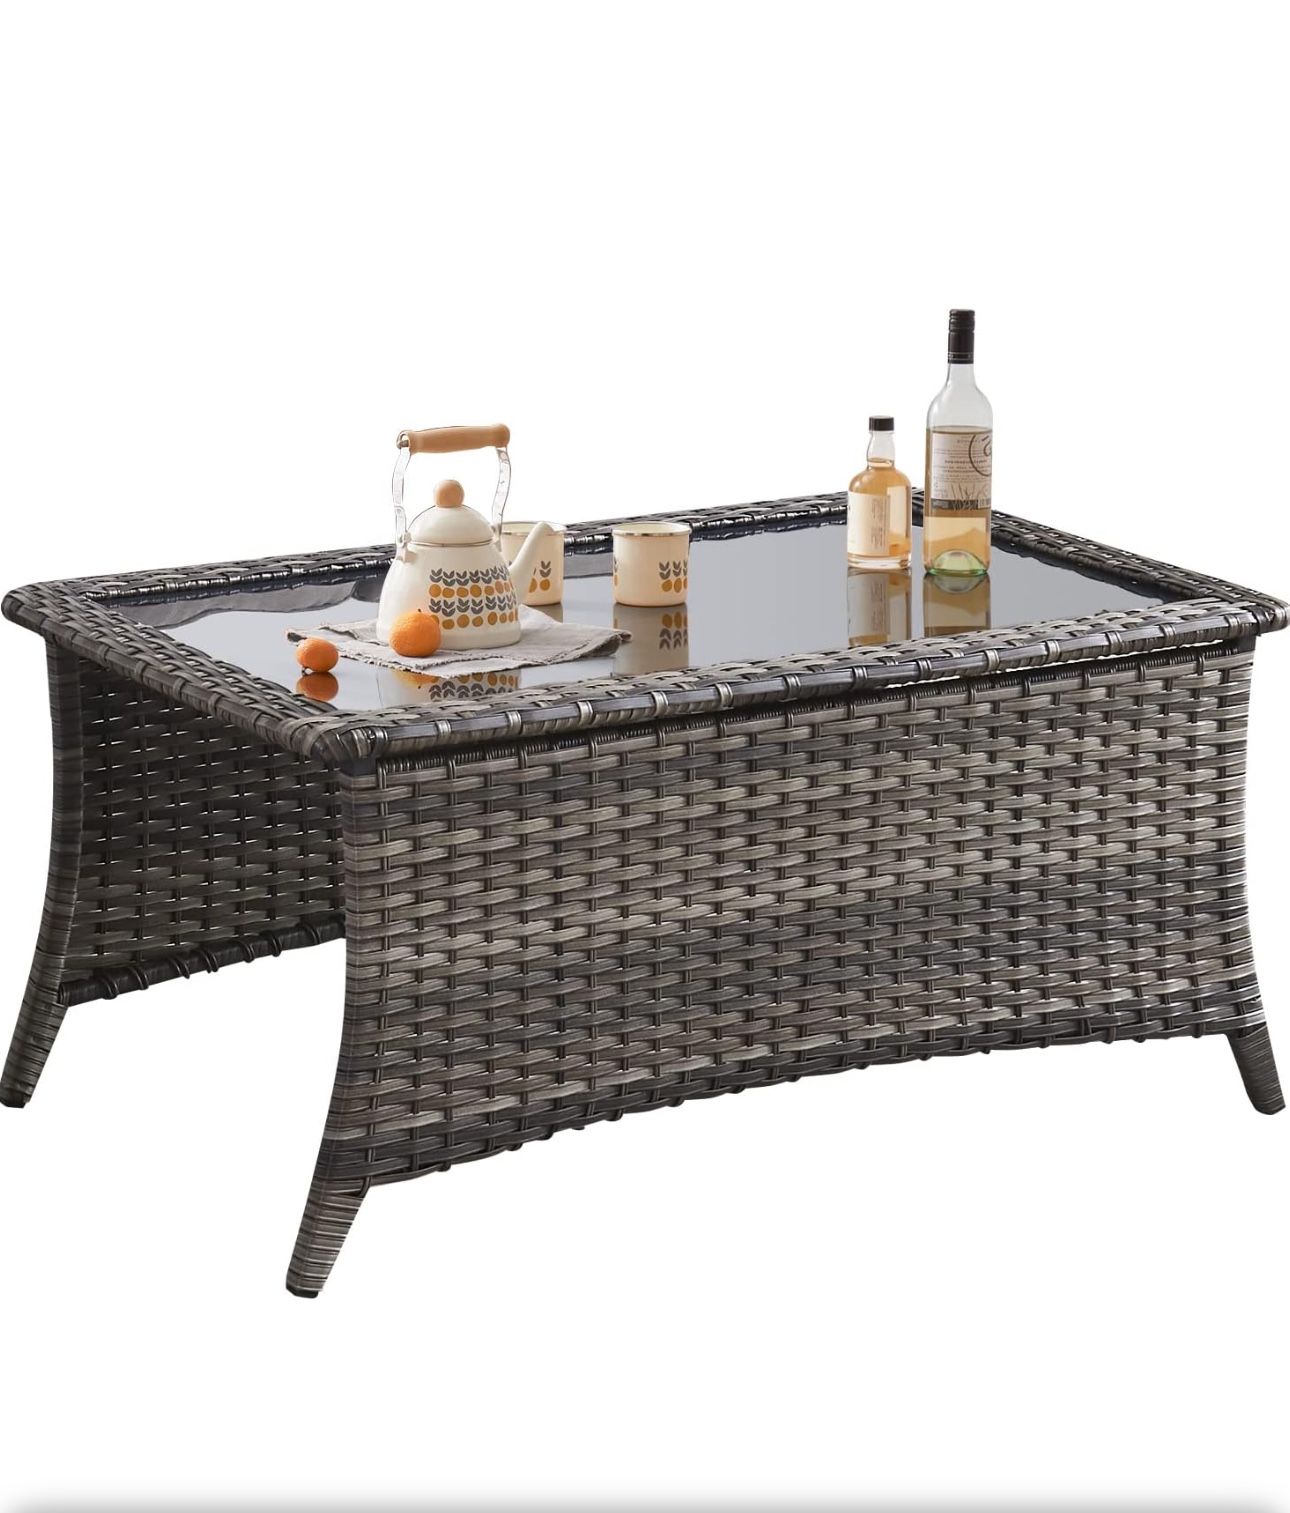 Patio Coffee Table Outdoor Rectangular Glass Table, Handwoven Rattan Patio Furniture Grey Wicker Coffee Table Compatible with Patio Chairs and Sofa Se